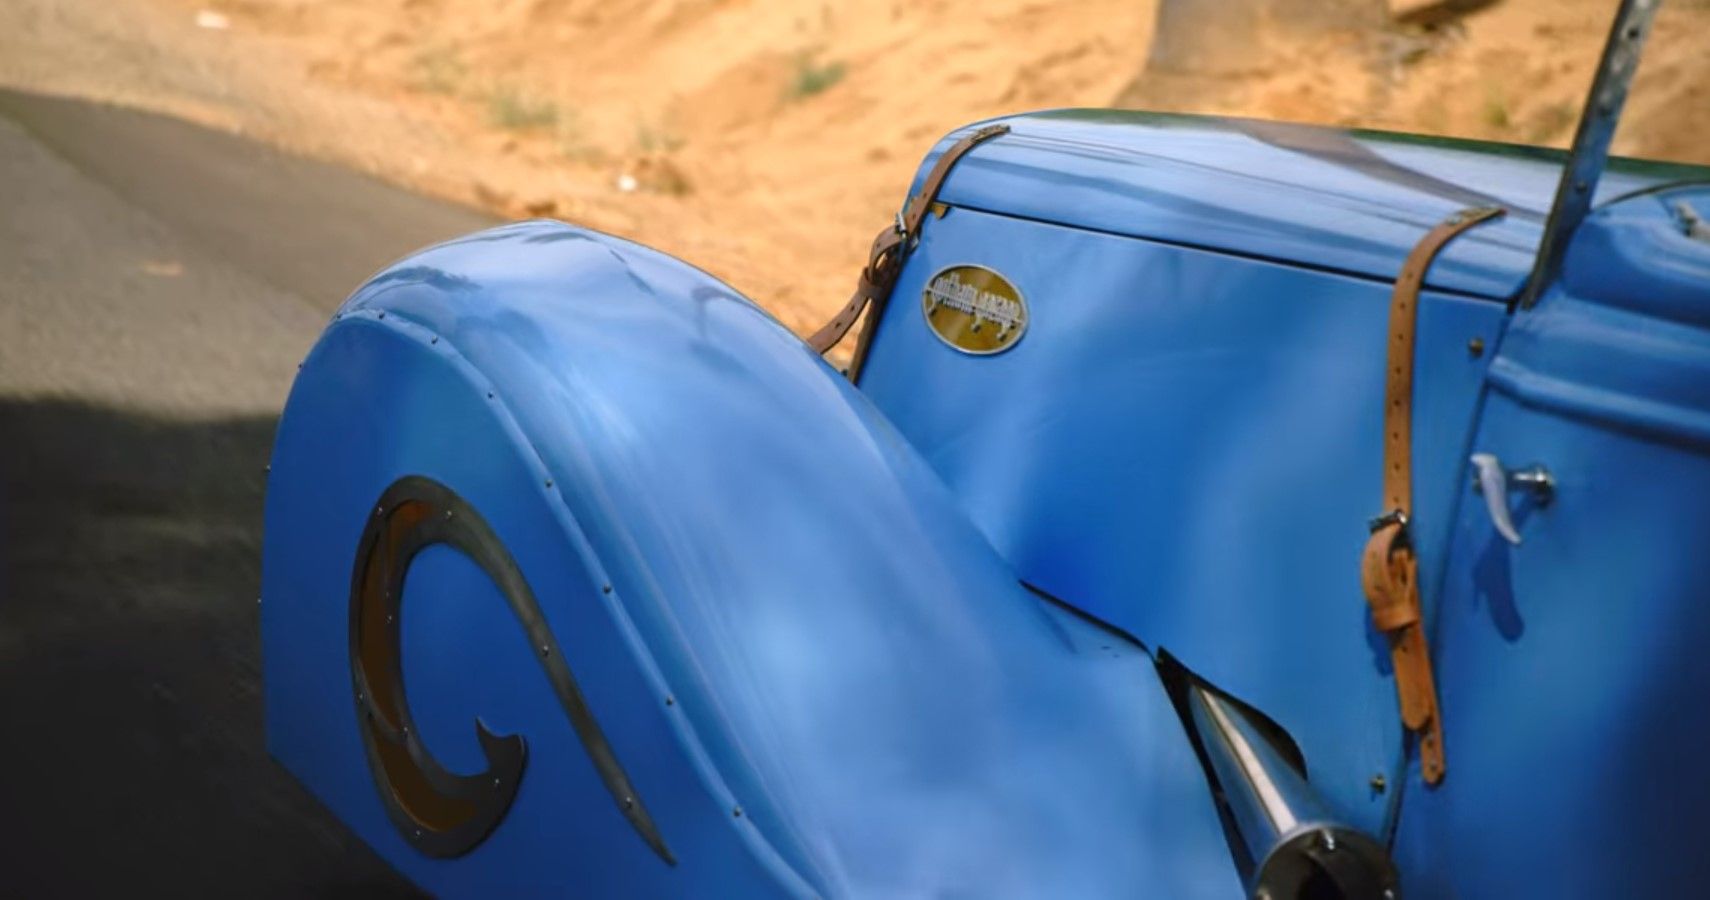 Delahaye-styled Ford Replica front fender close-up view